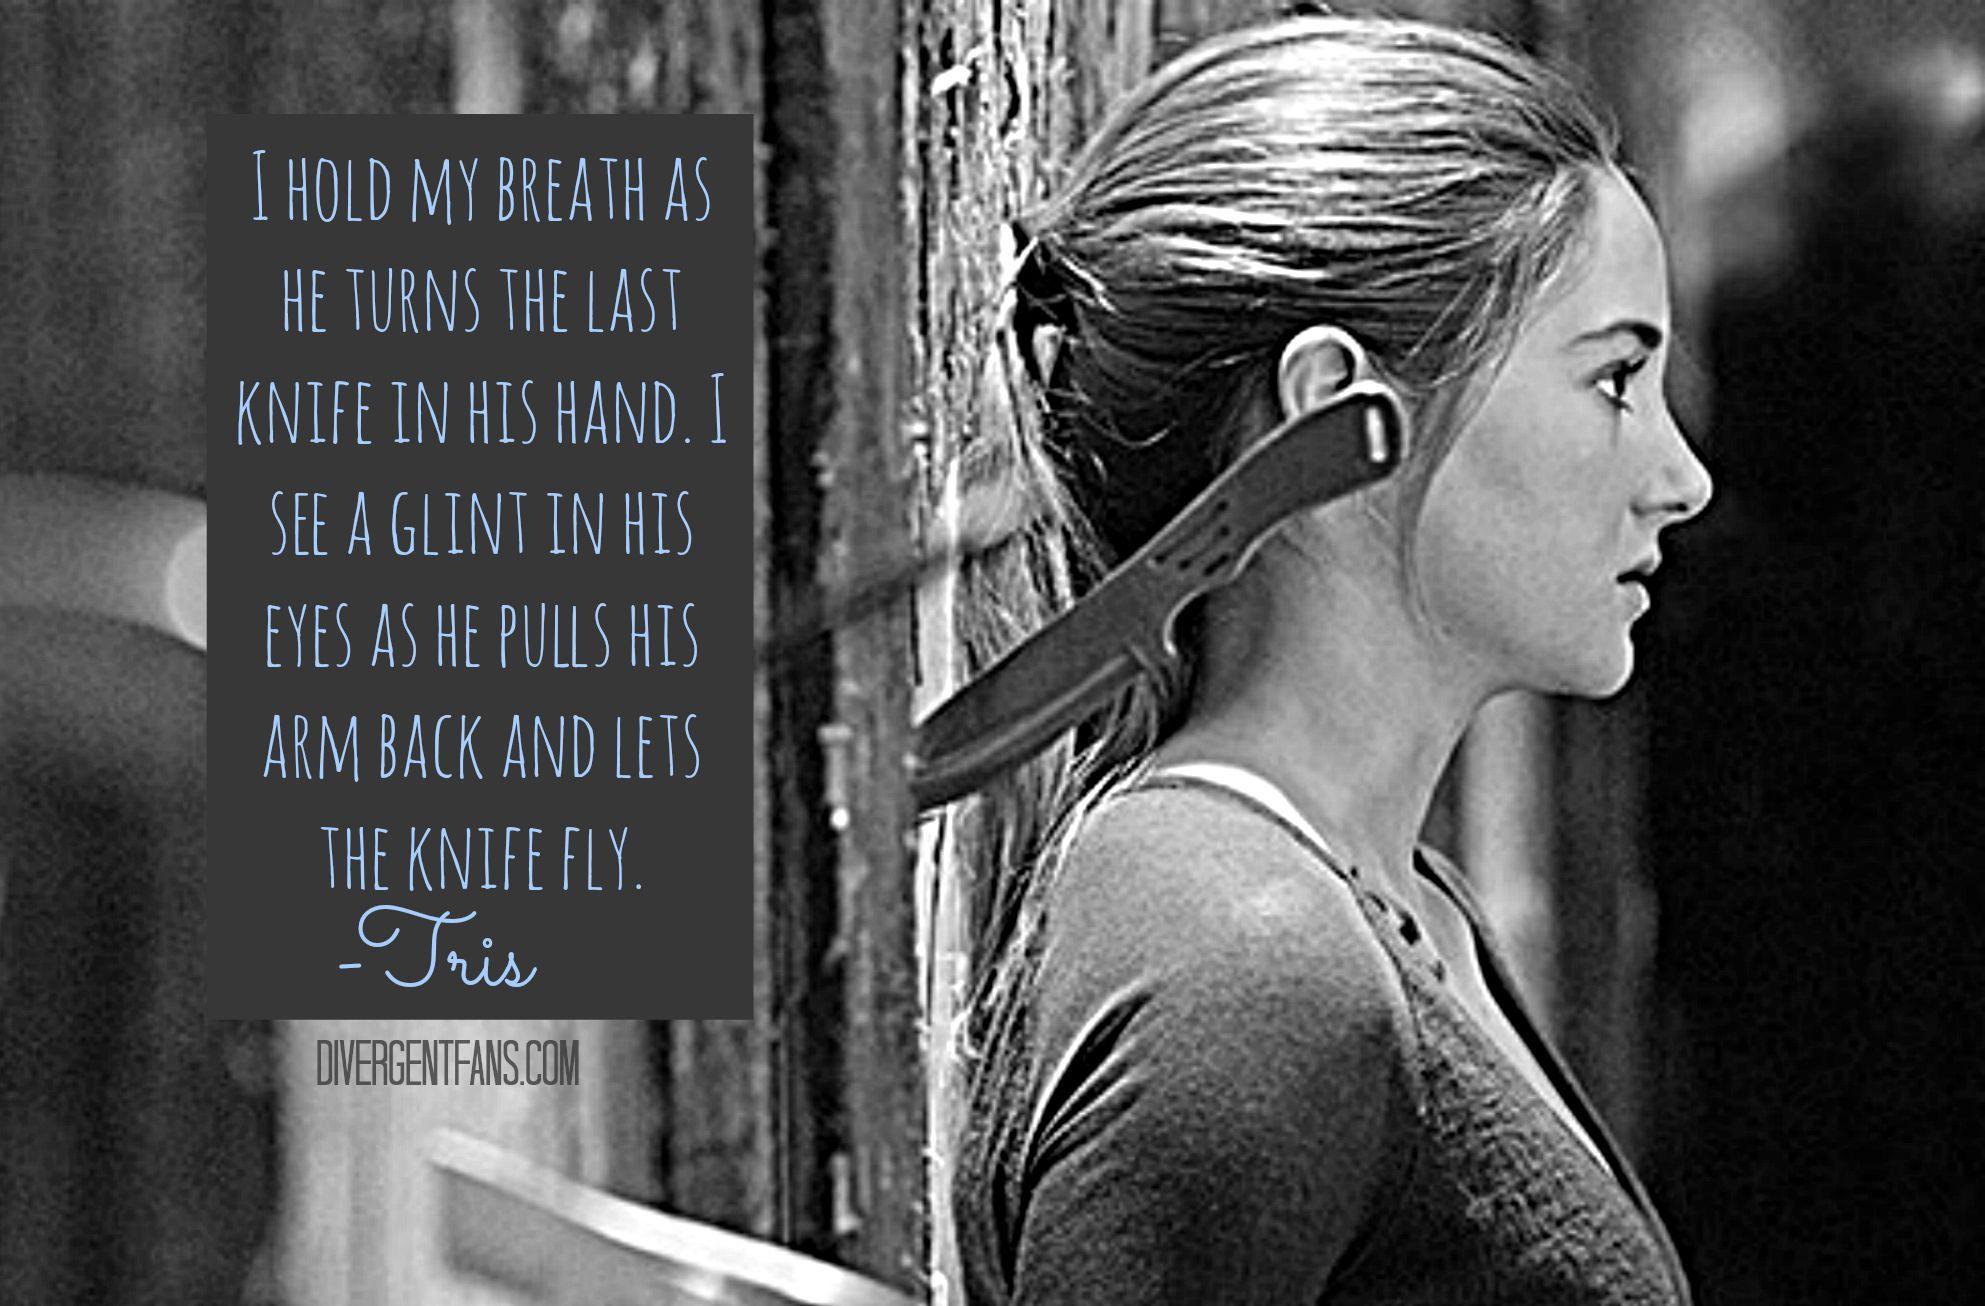 image about Divergent Wallpaper and Quotes